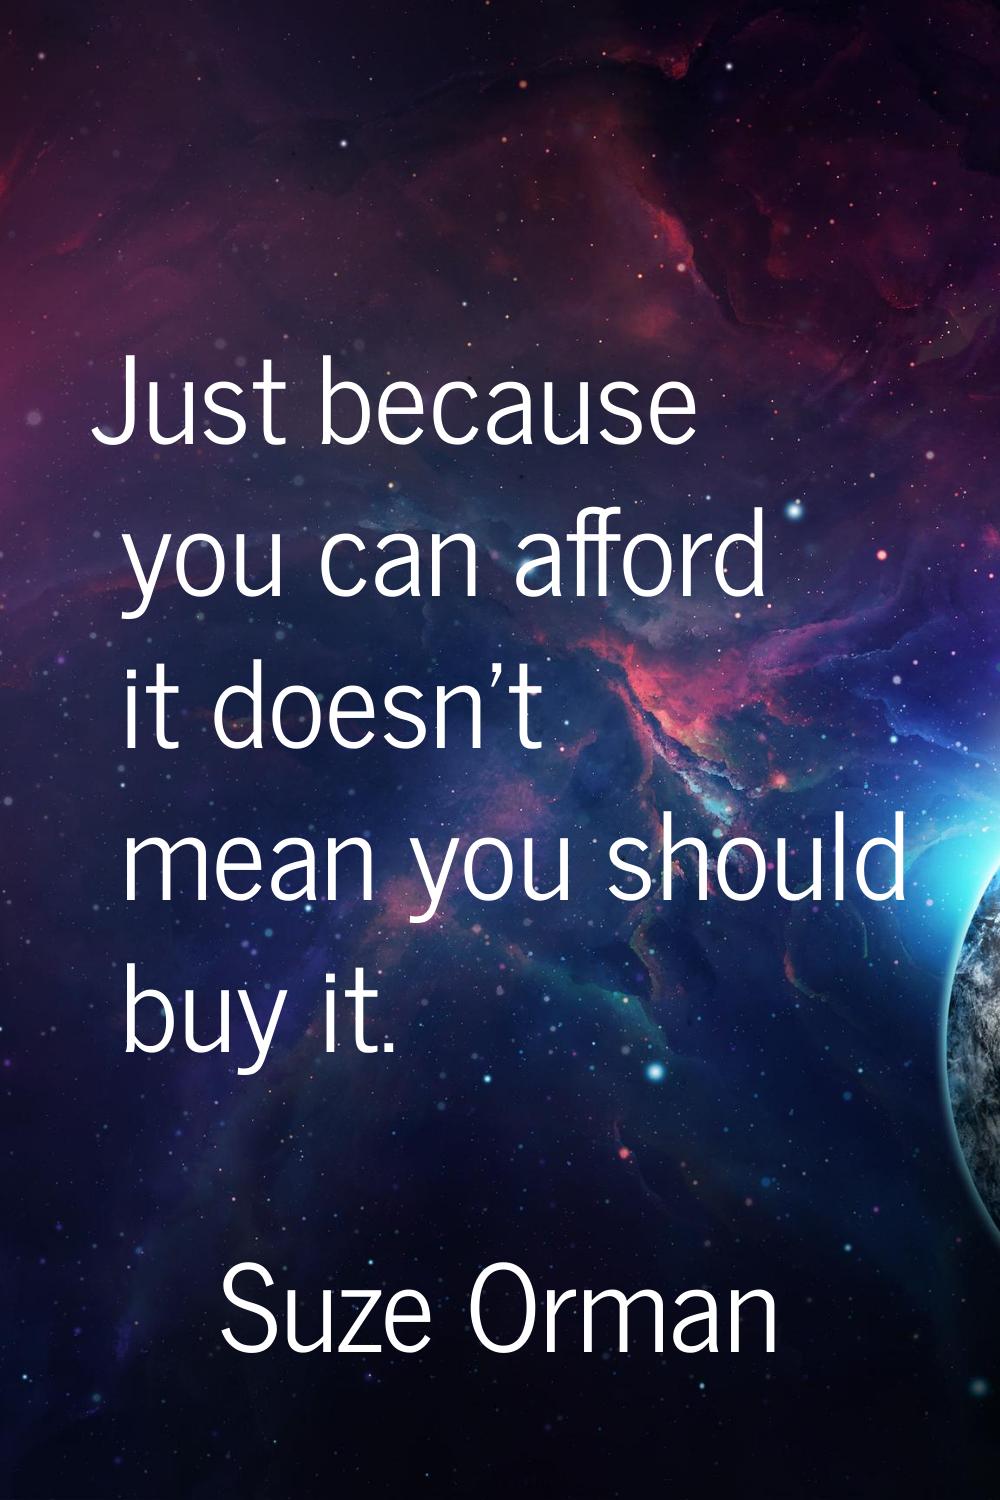 Just because you can afford it doesn't mean you should buy it.